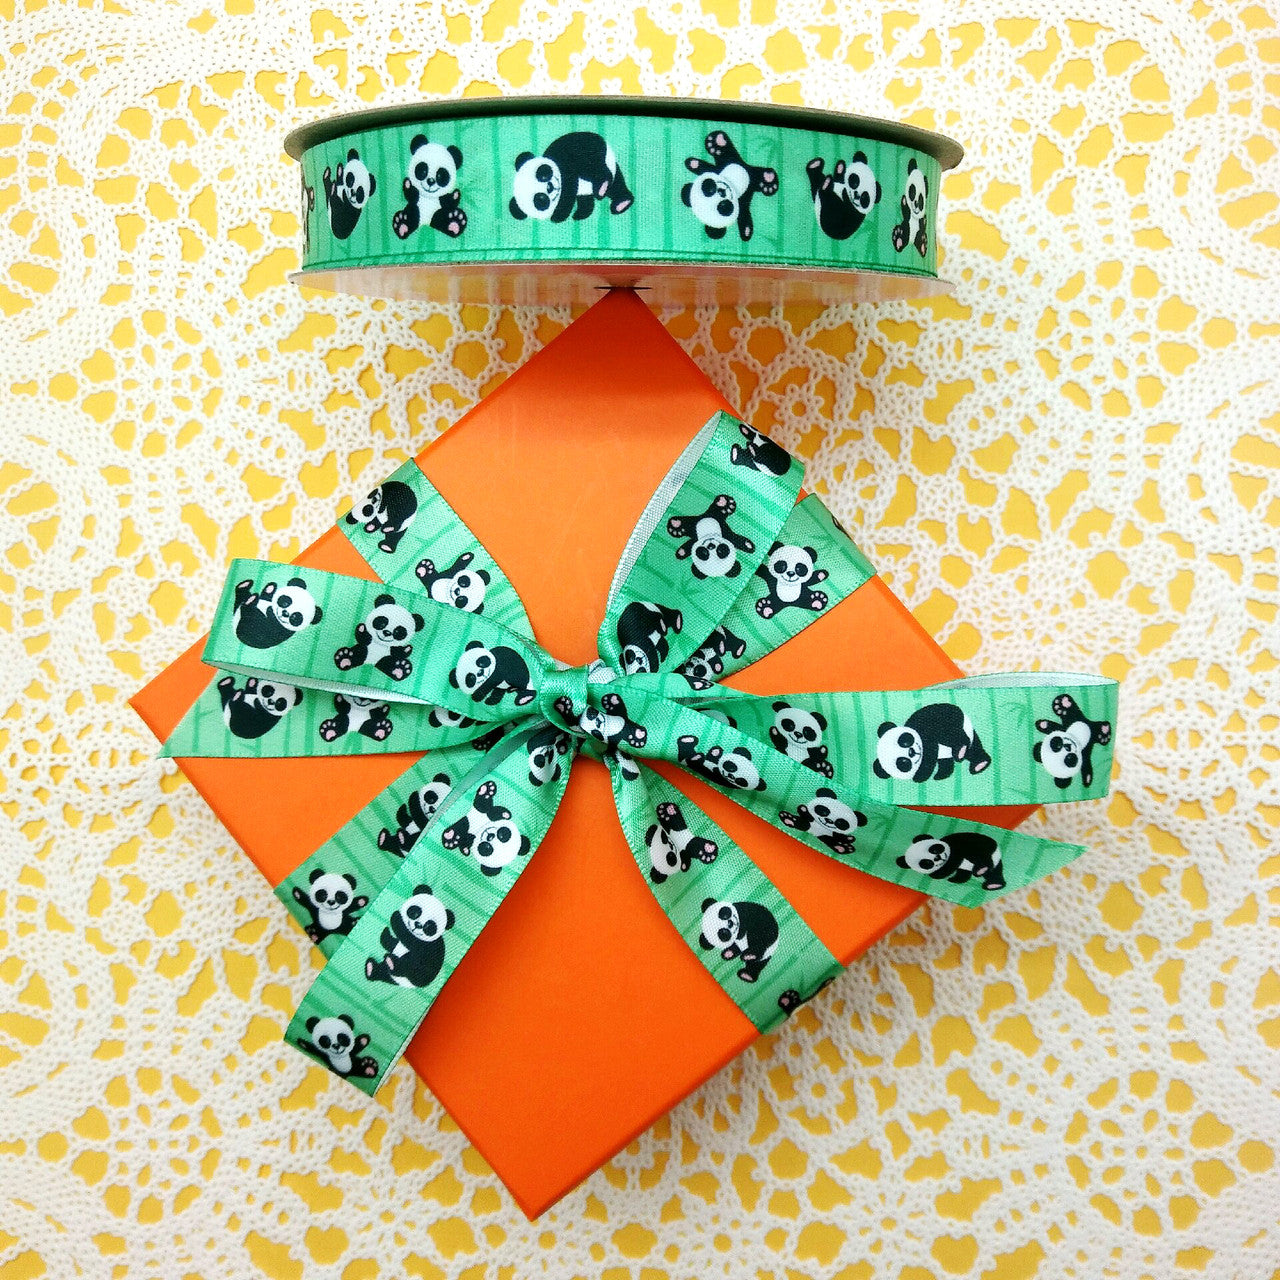 Tie a little box with our panda bears to bring a smile to the recipient's face!